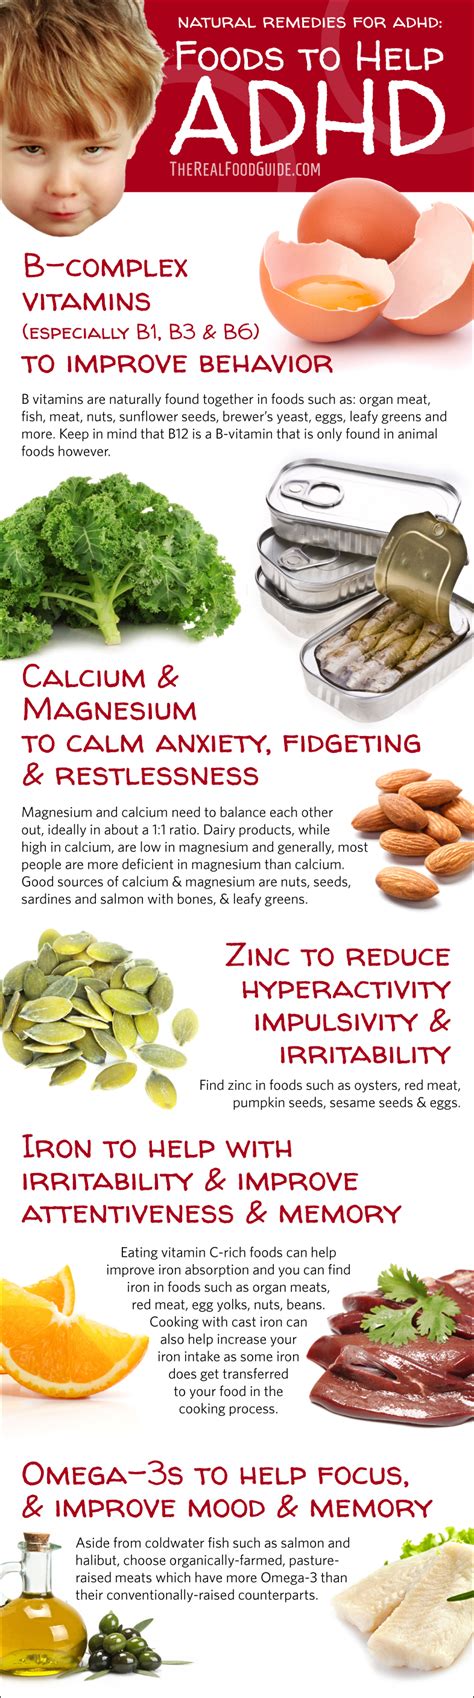 Natural Remedies For Adhd Nutrients For Adhd Infograph